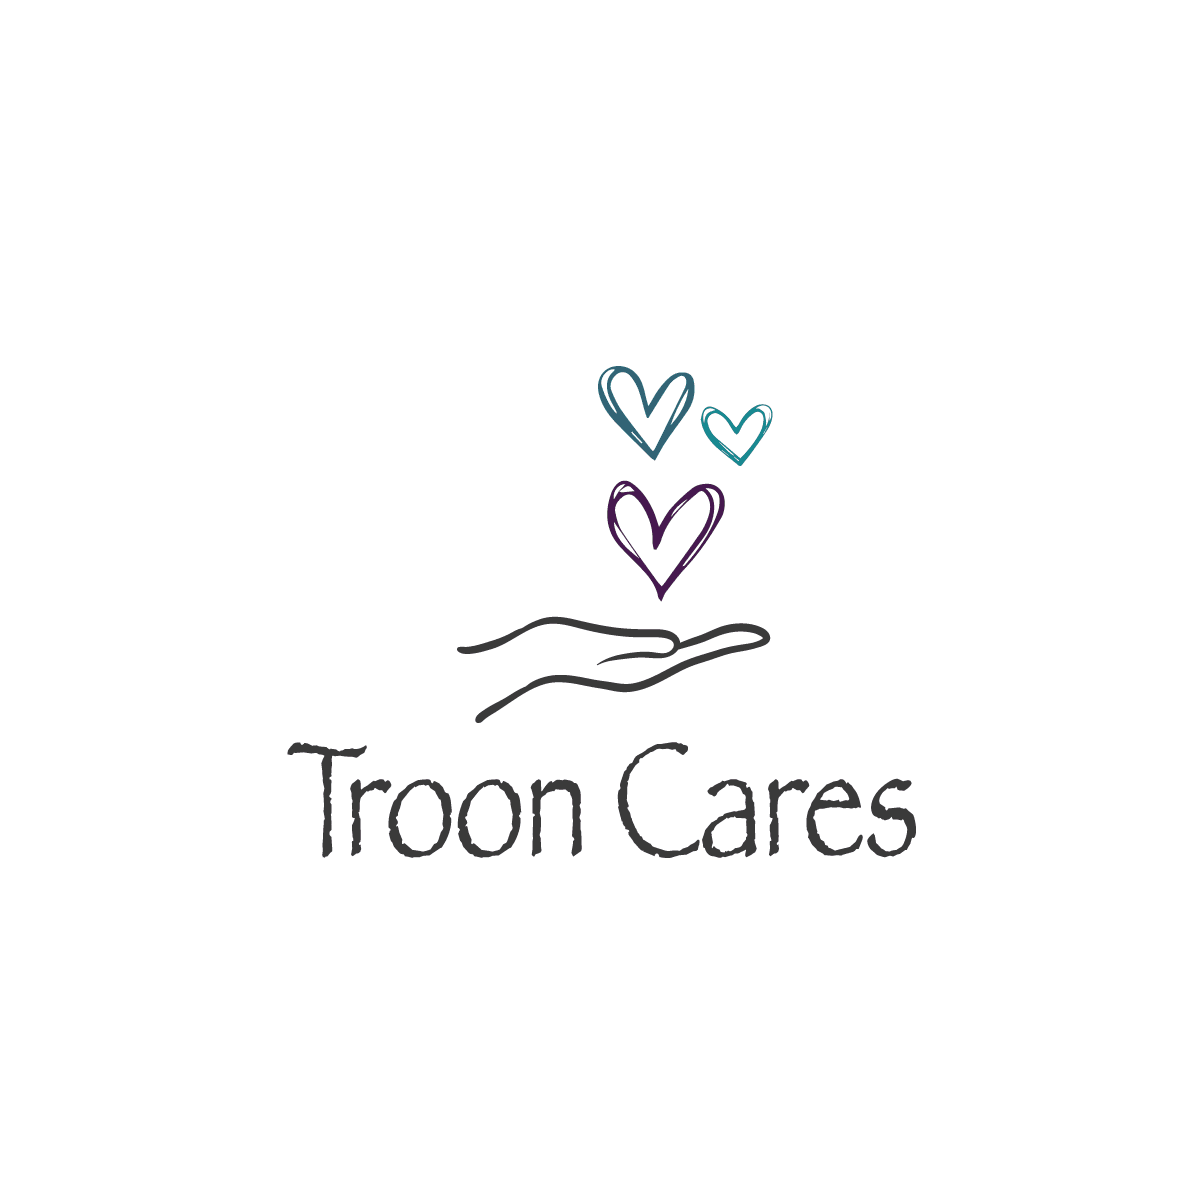 Troon Cares